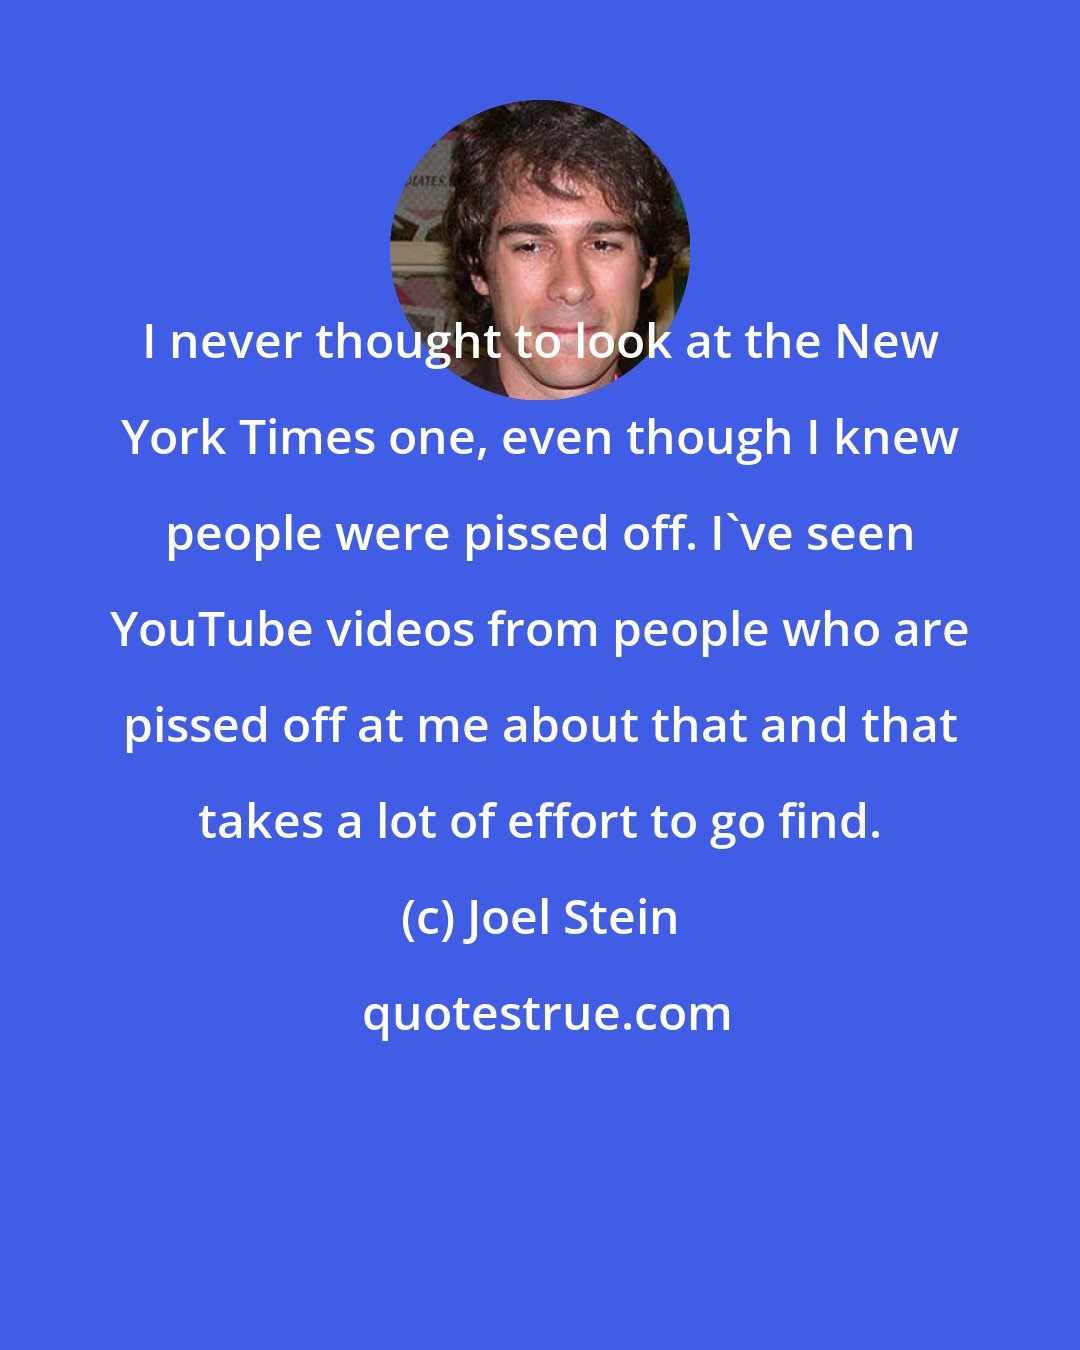 Joel Stein: I never thought to look at the New York Times one, even though I knew people were pissed off. I've seen YouTube videos from people who are pissed off at me about that and that takes a lot of effort to go find.